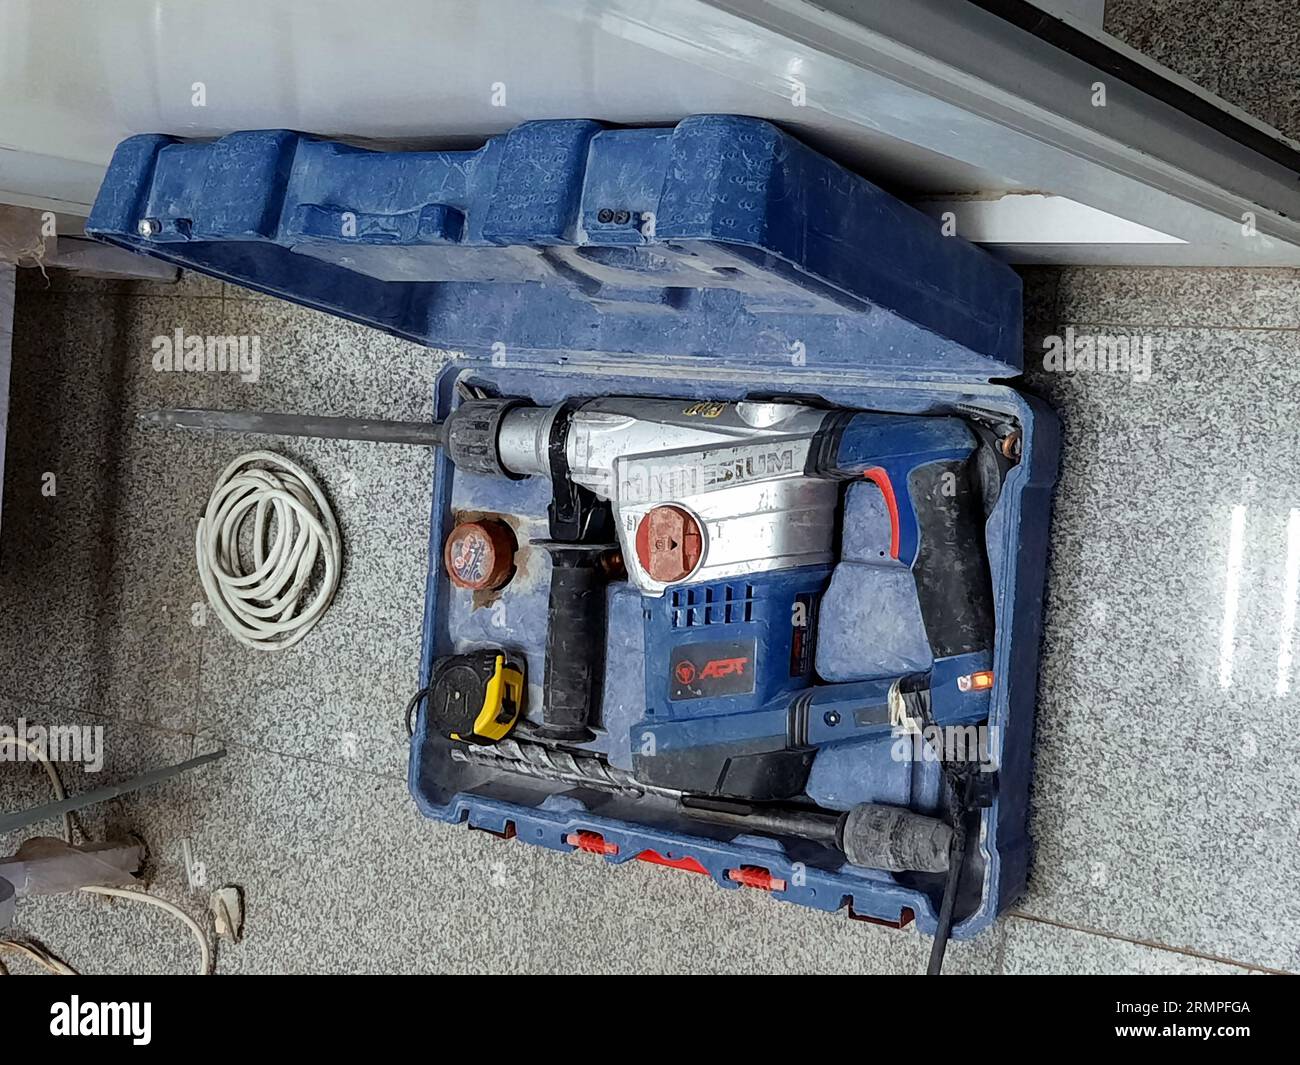 Cairo, Egypt, August 24 2023: Hammer drill for concrete blocks, A drill is a tool used for making round holes or driving fasteners, Drills are commonl Stock Photo